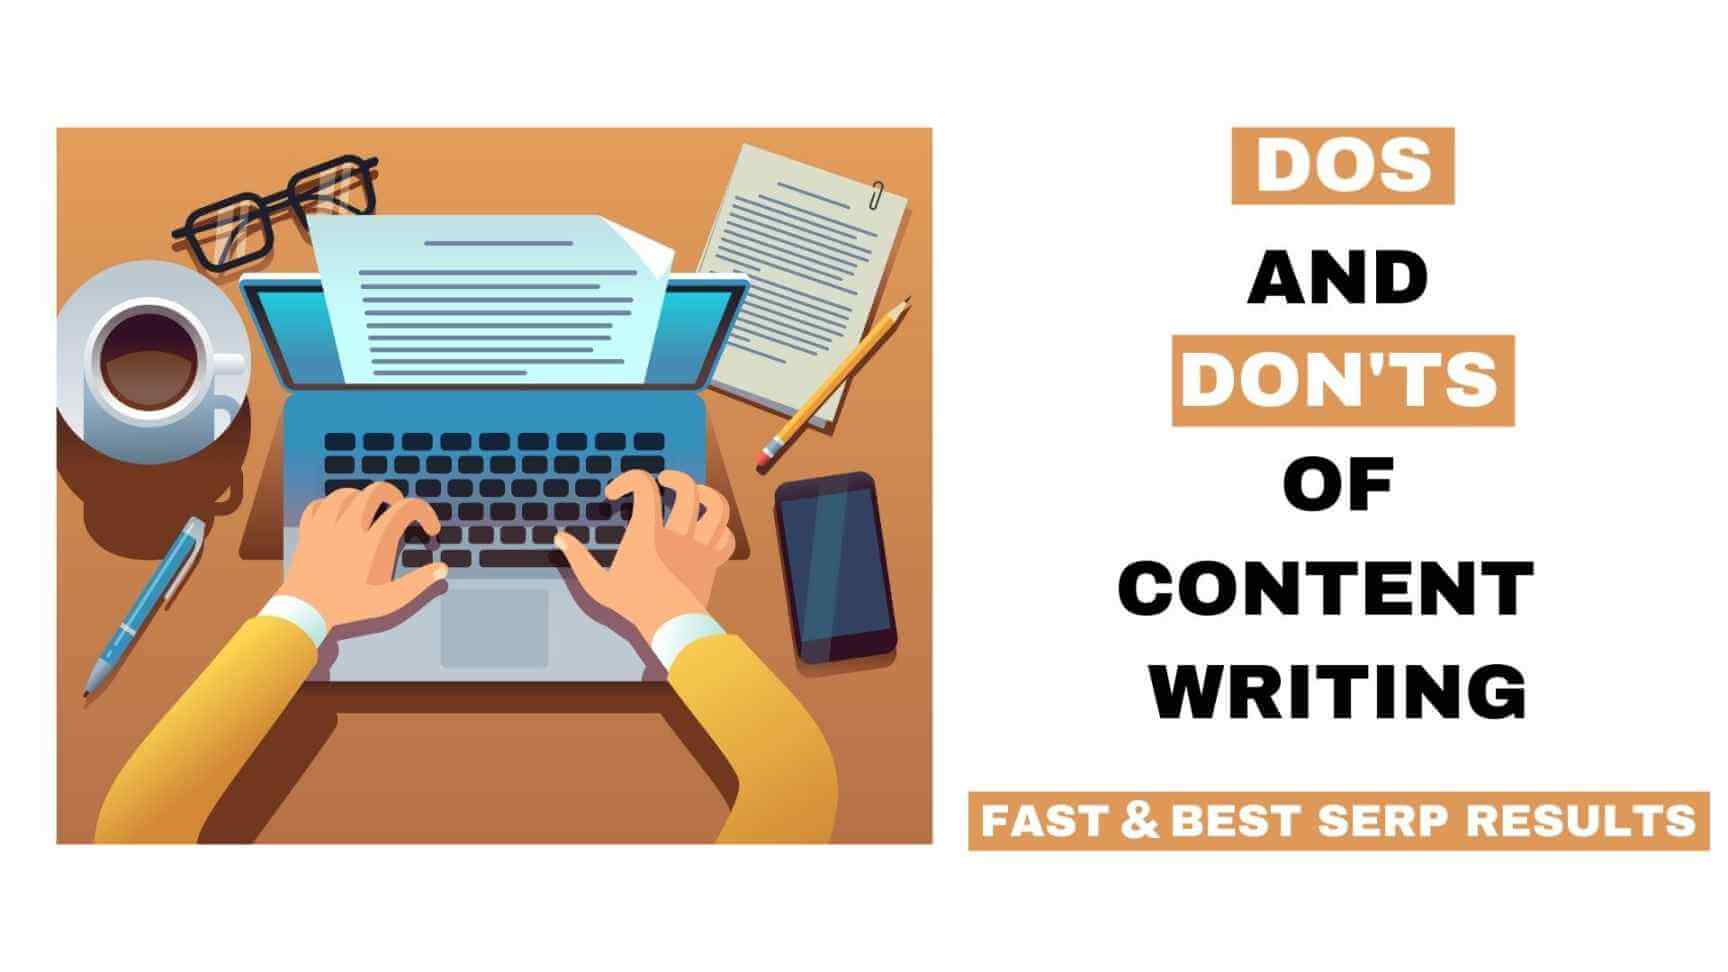 Dos & Don'ts of Content Writing For Fast & Best SERP Results